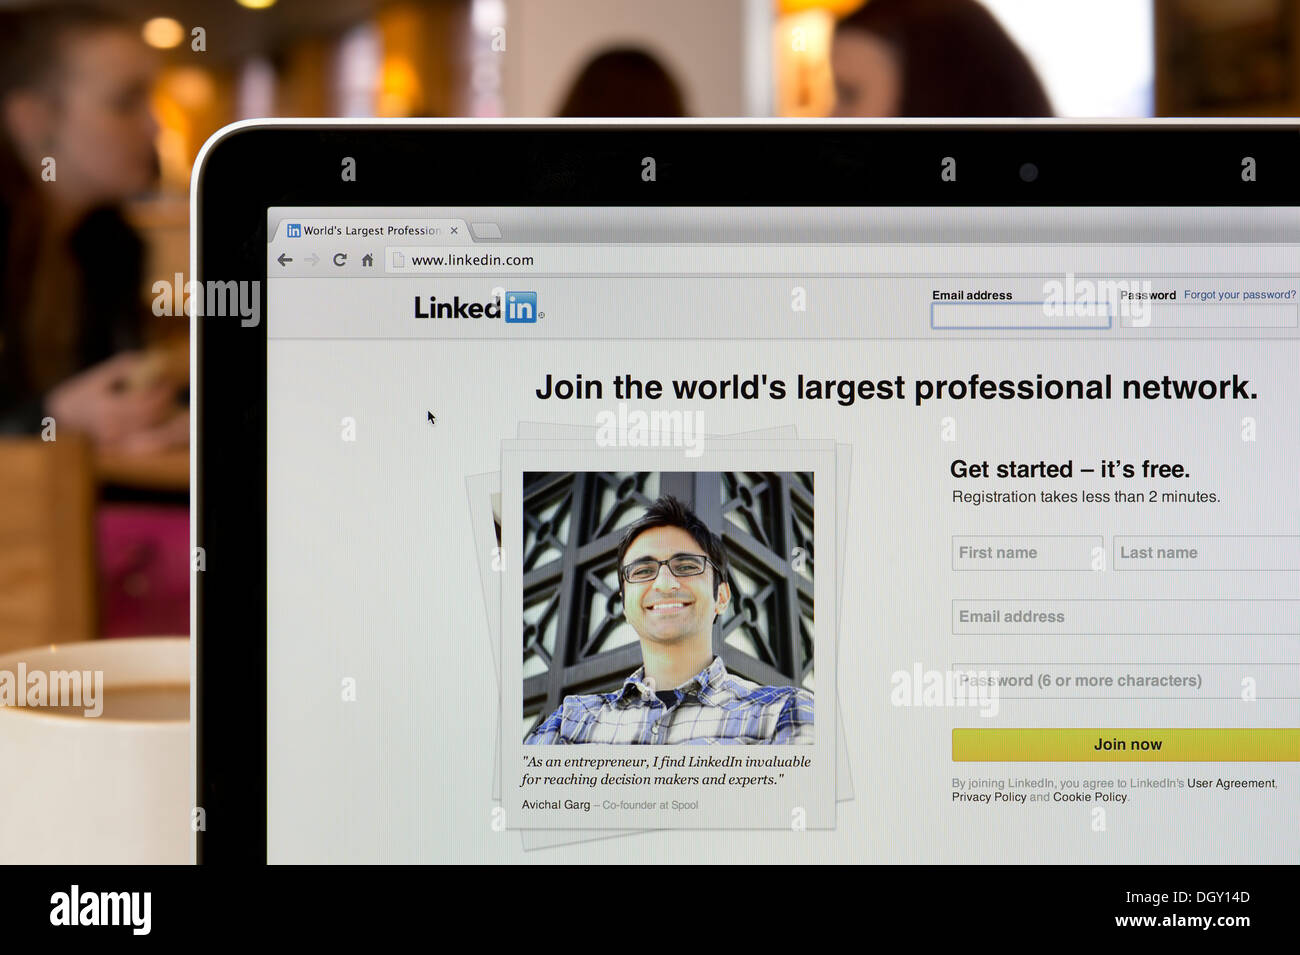 The LinkedIn website shot in a coffee shop environment (Editorial use only: ­print, TV, e-book and editorial website). Stock Photo